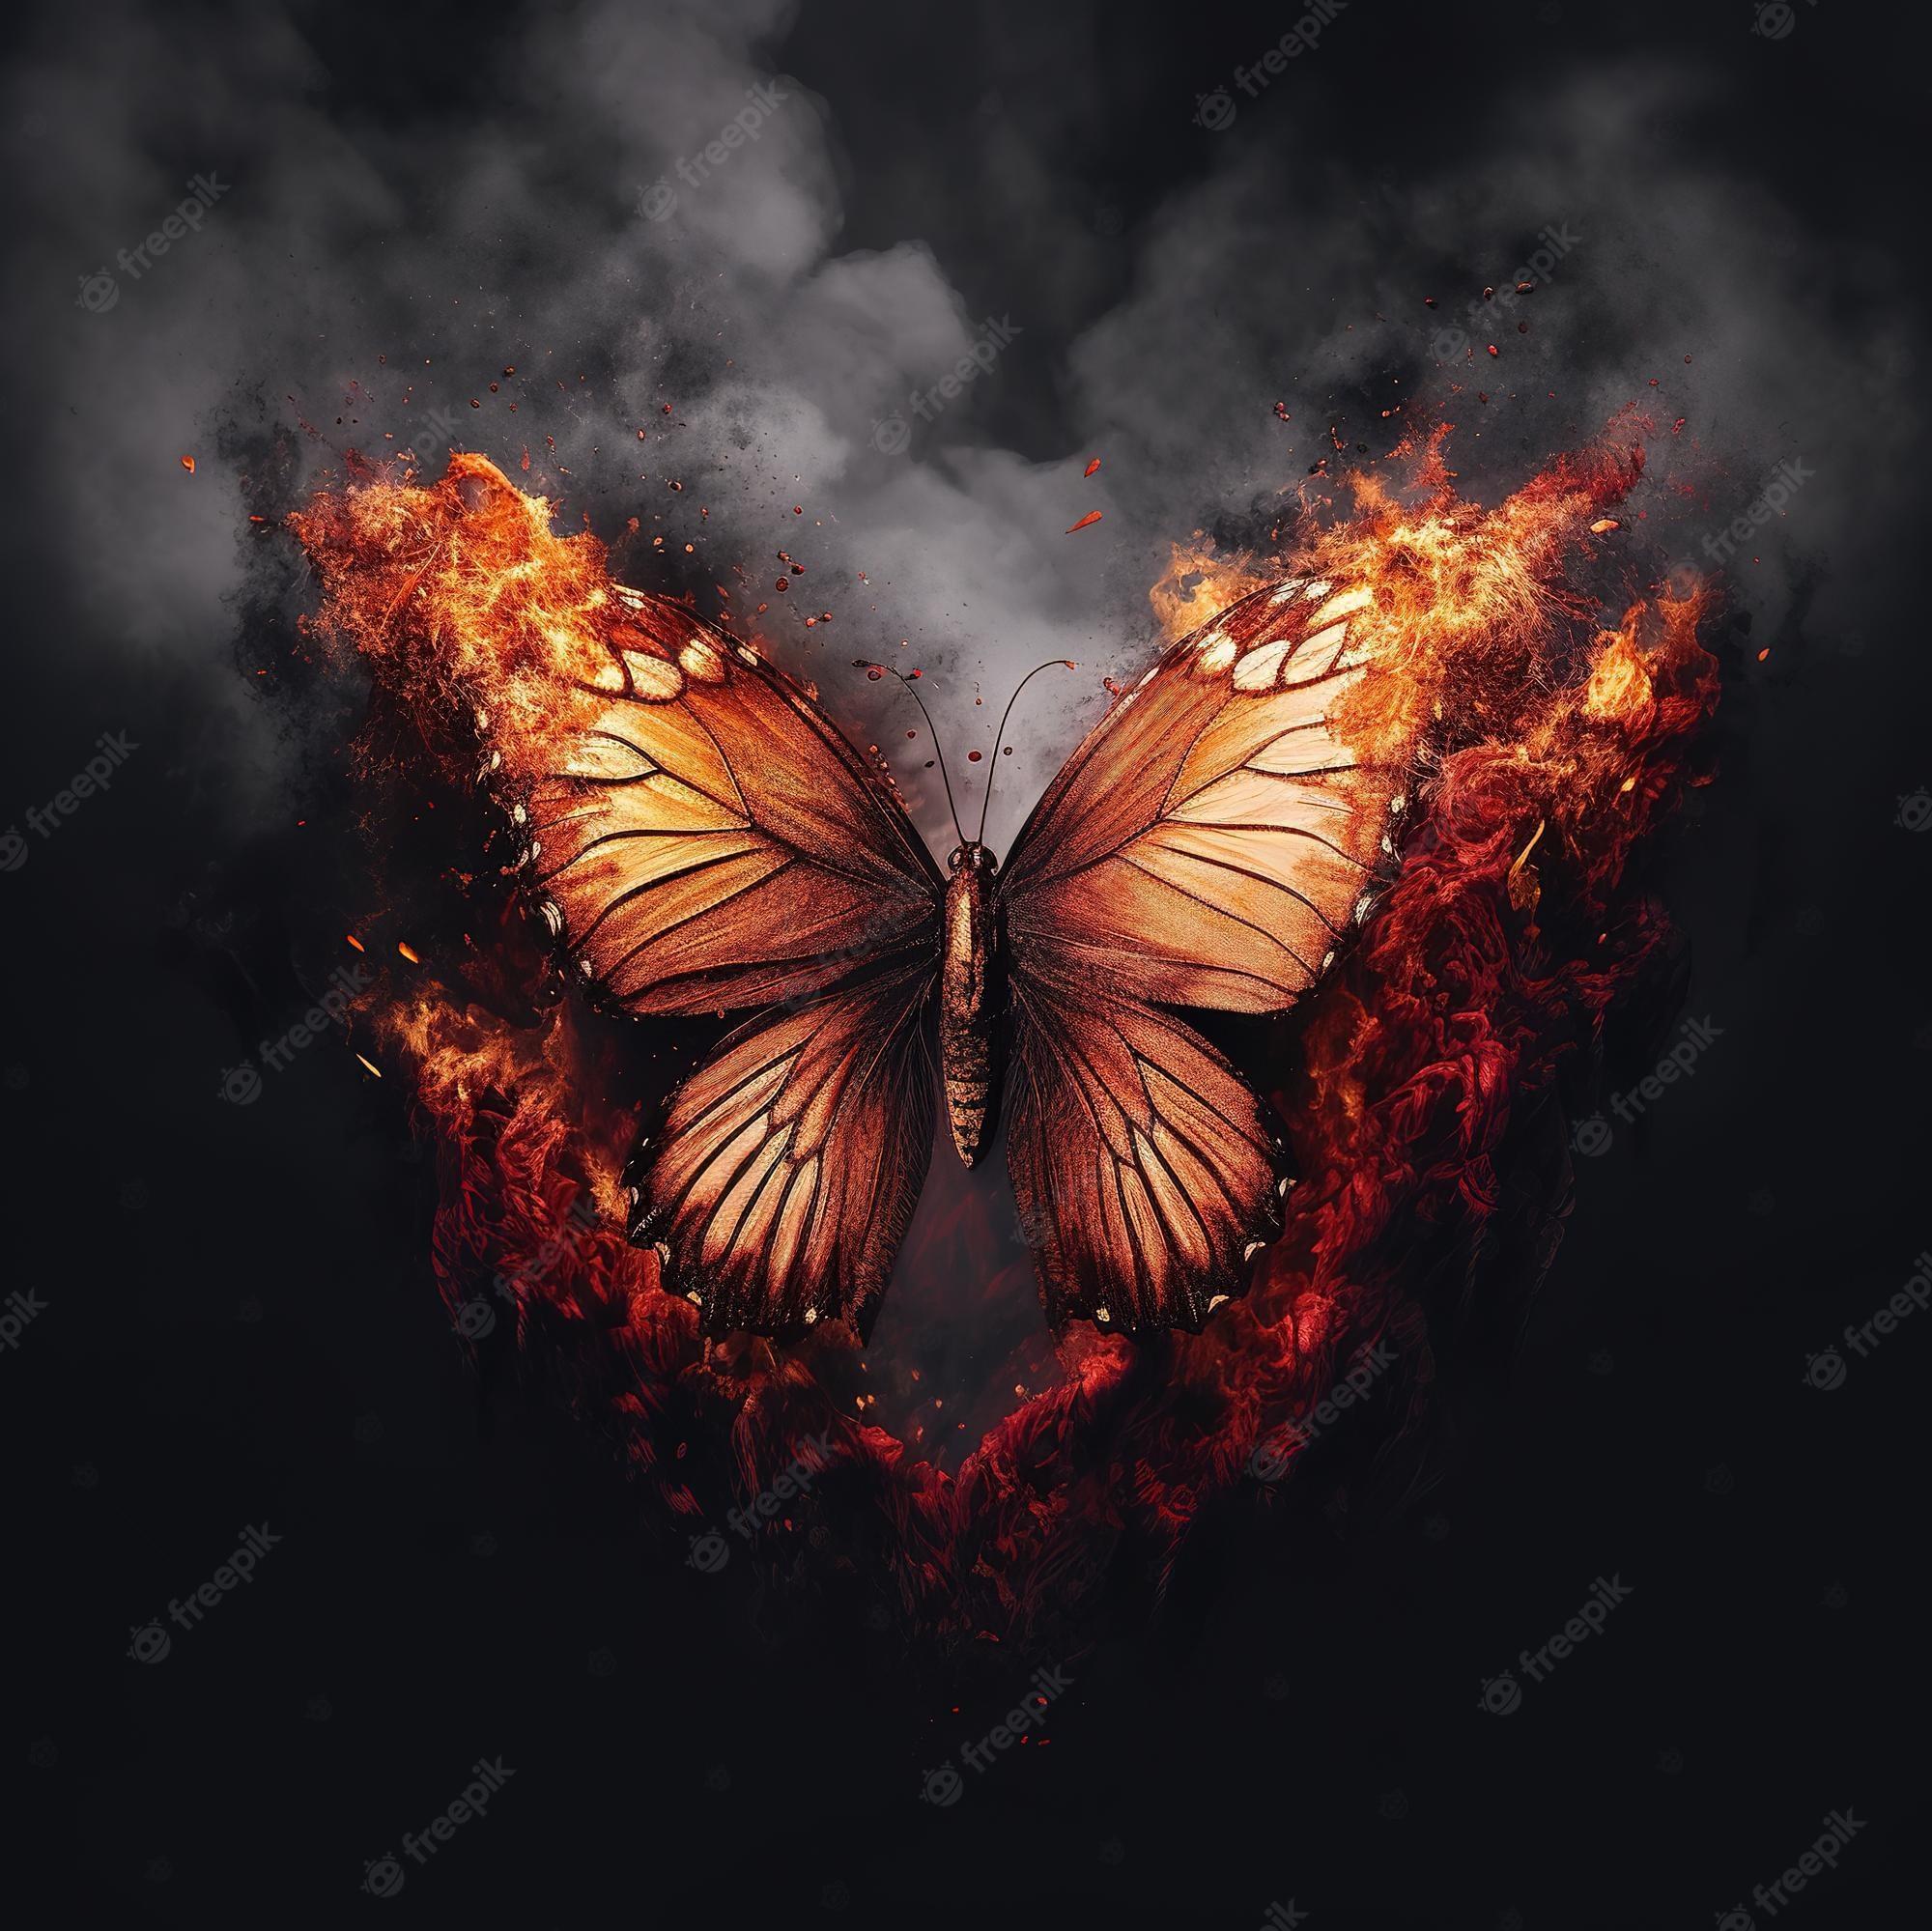 Premium Photo A Butterfly With The Word Fire On It